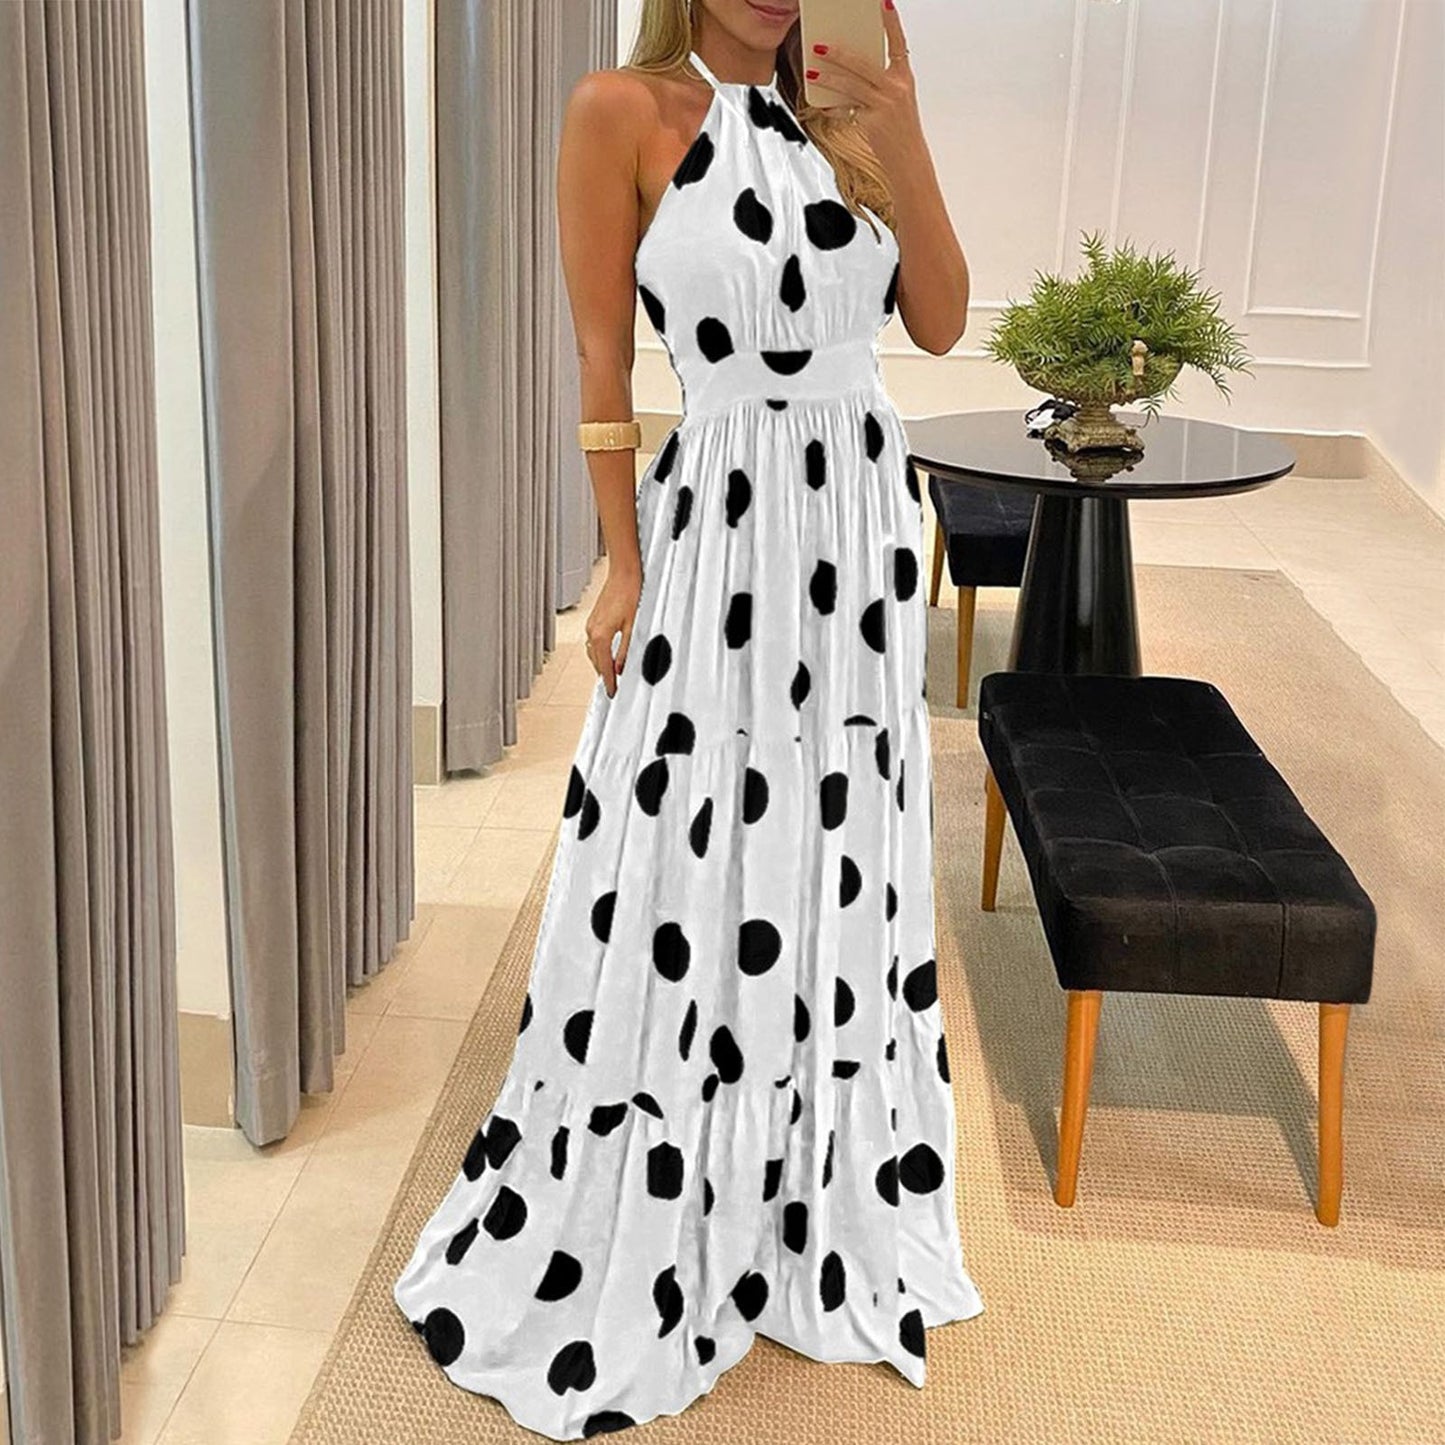 Summer Long Dress Polka Dot Casual Dresses Black Sexy Halter Strapless New - Yellow Sundress Vacation Clothes For Women